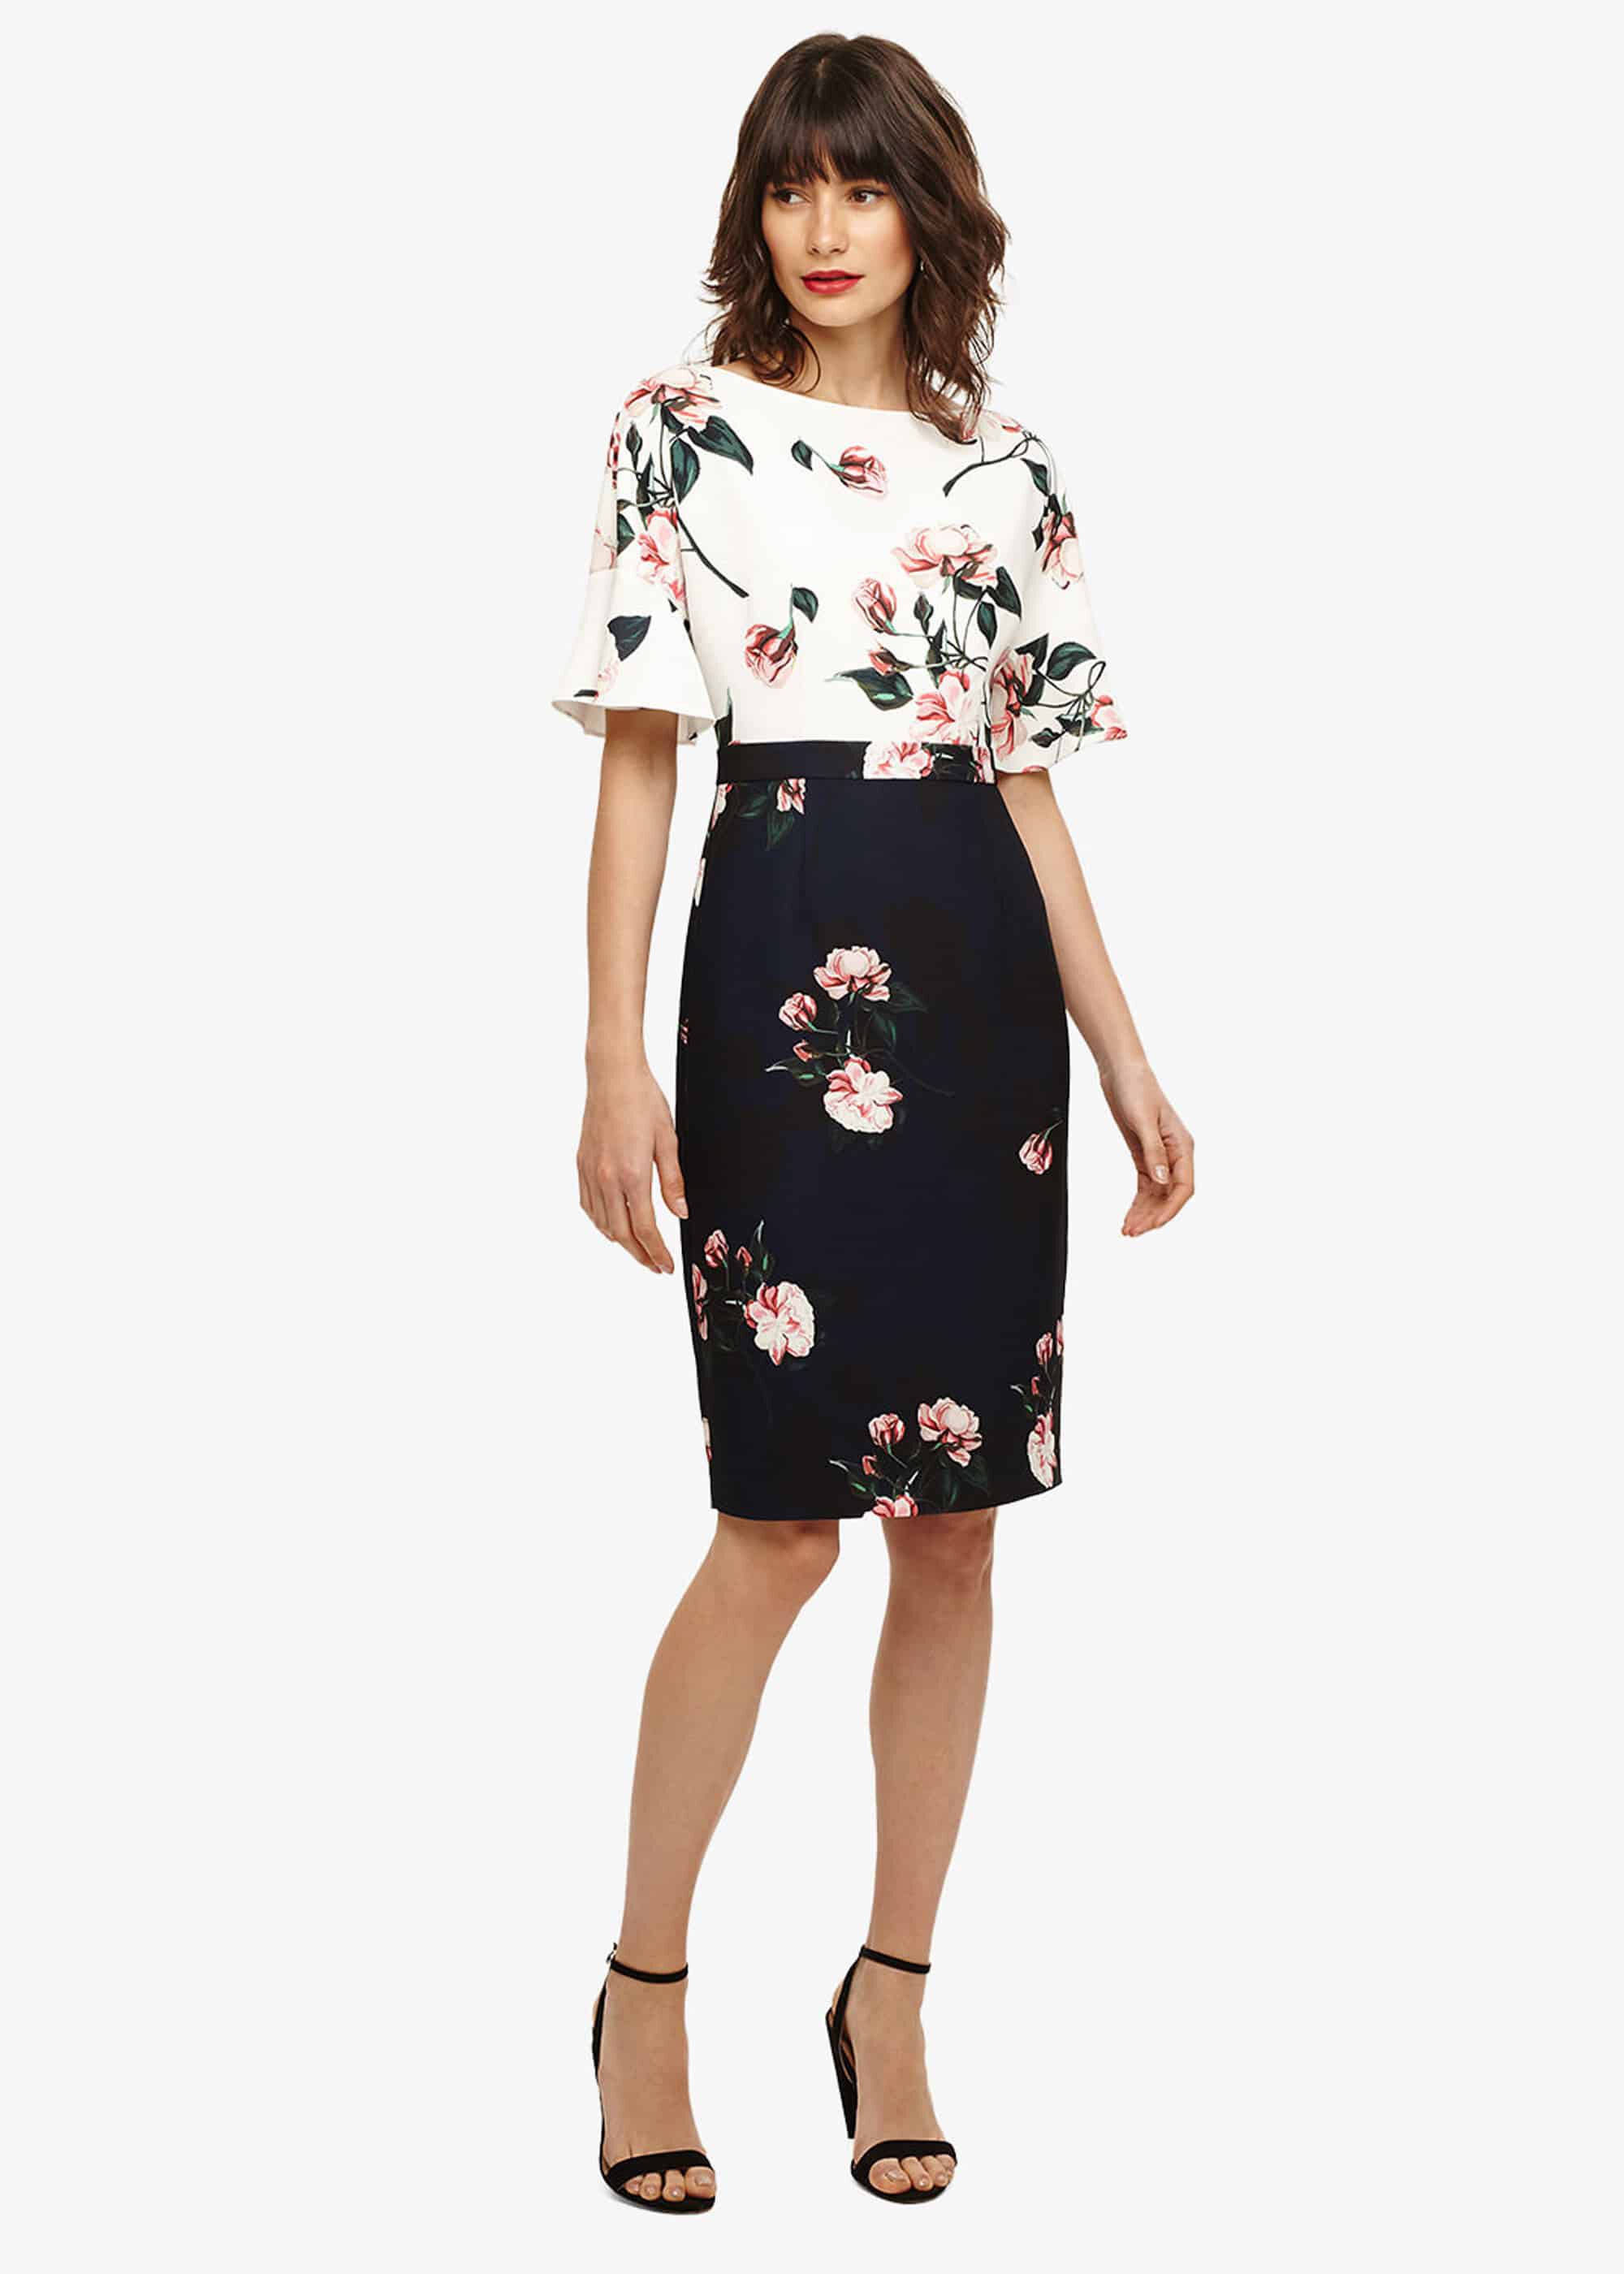 heather floral dress phase eight